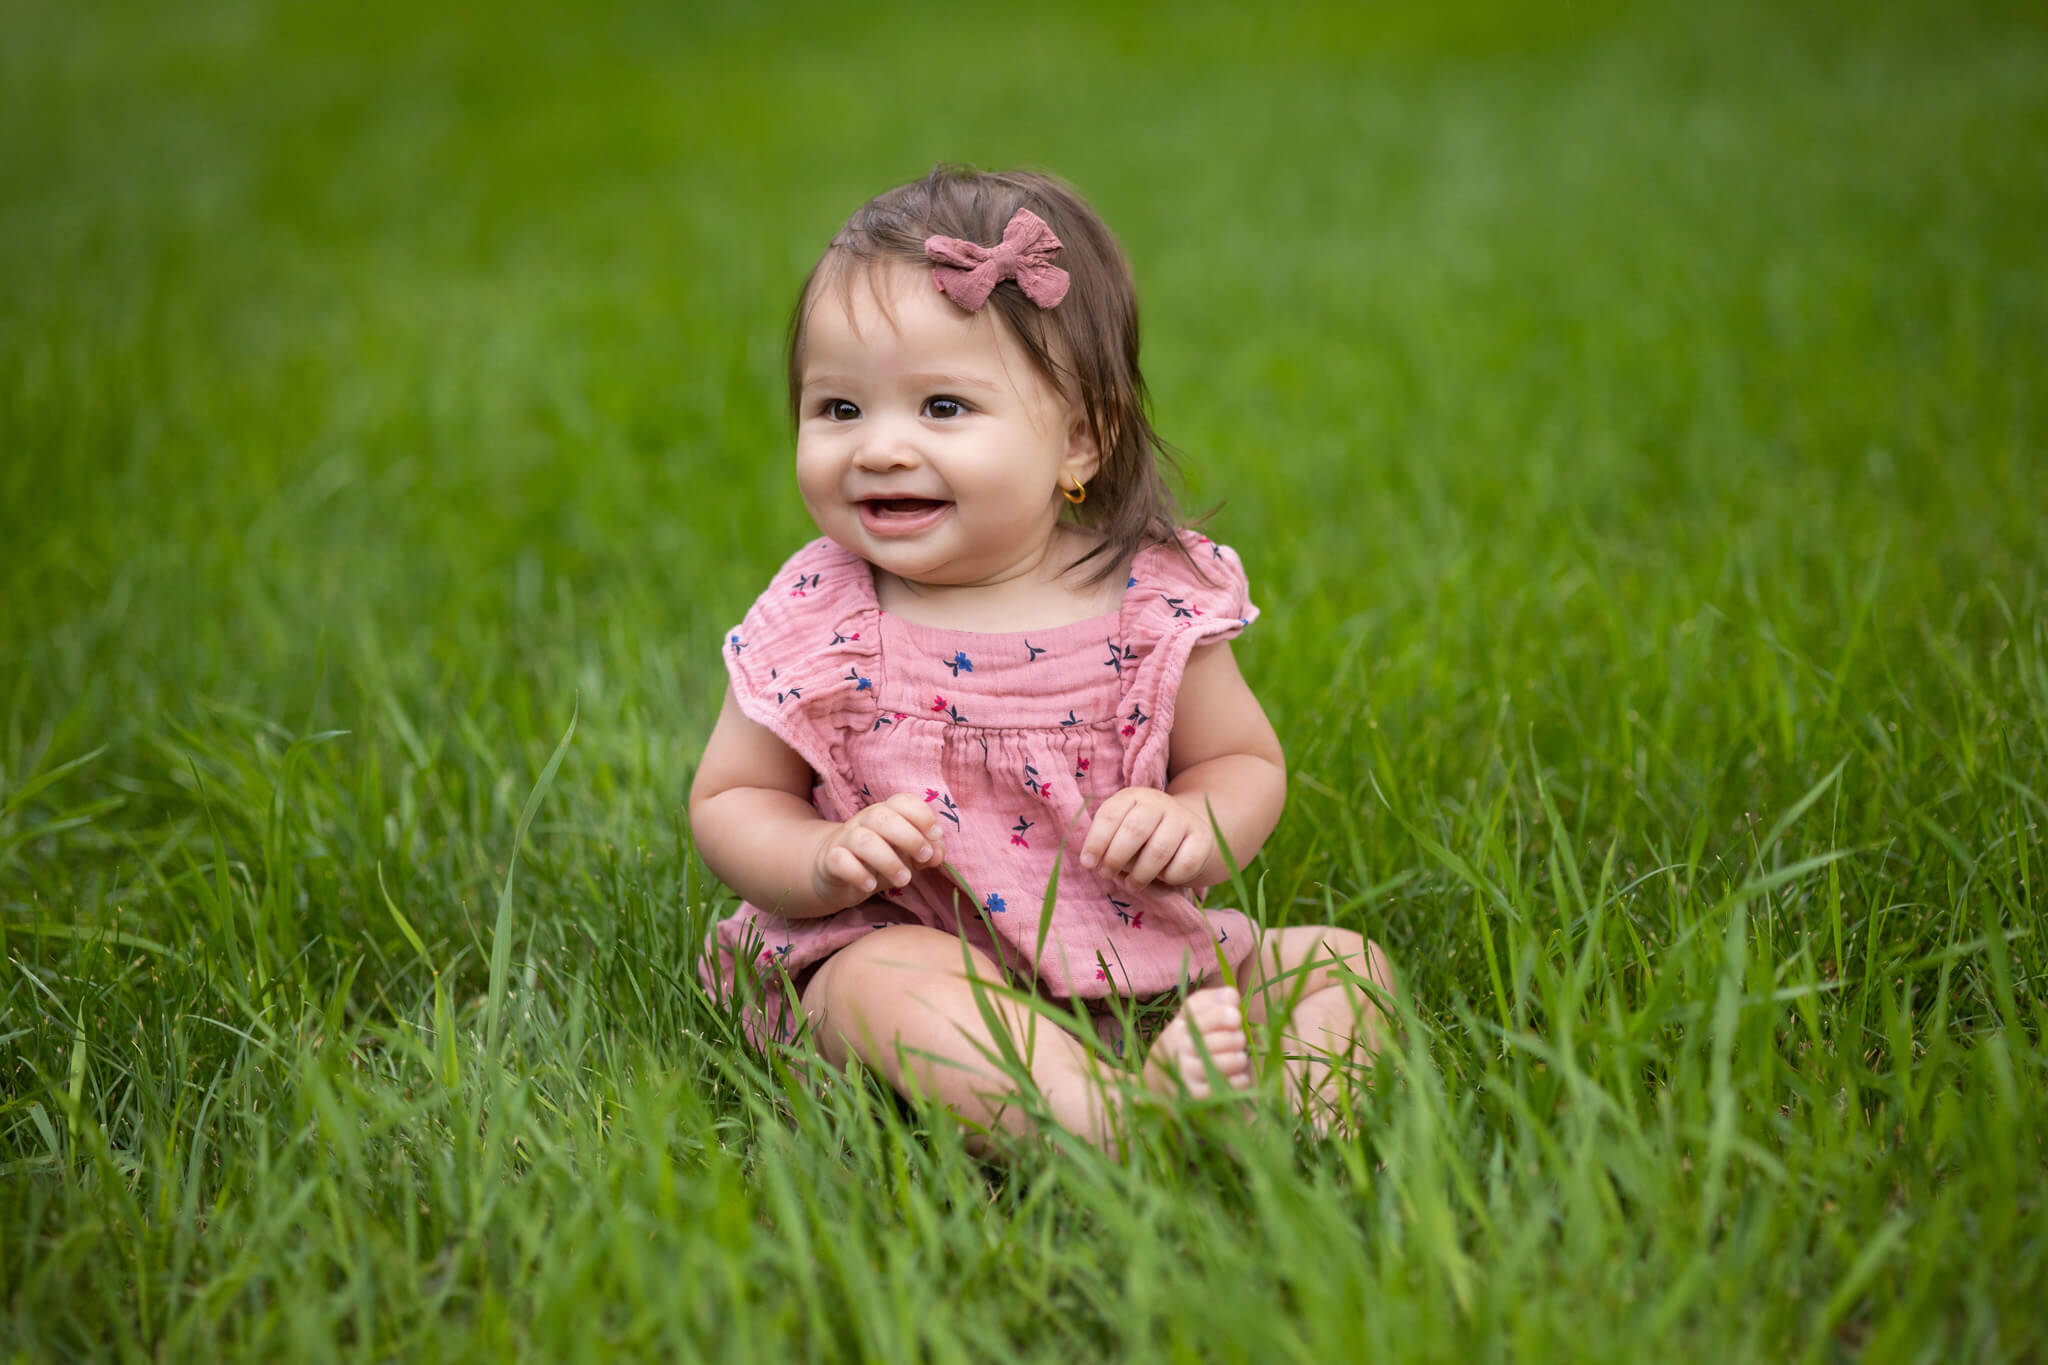 6 months old dark haired little girl sitting in a green grassy field in Beulah, CO